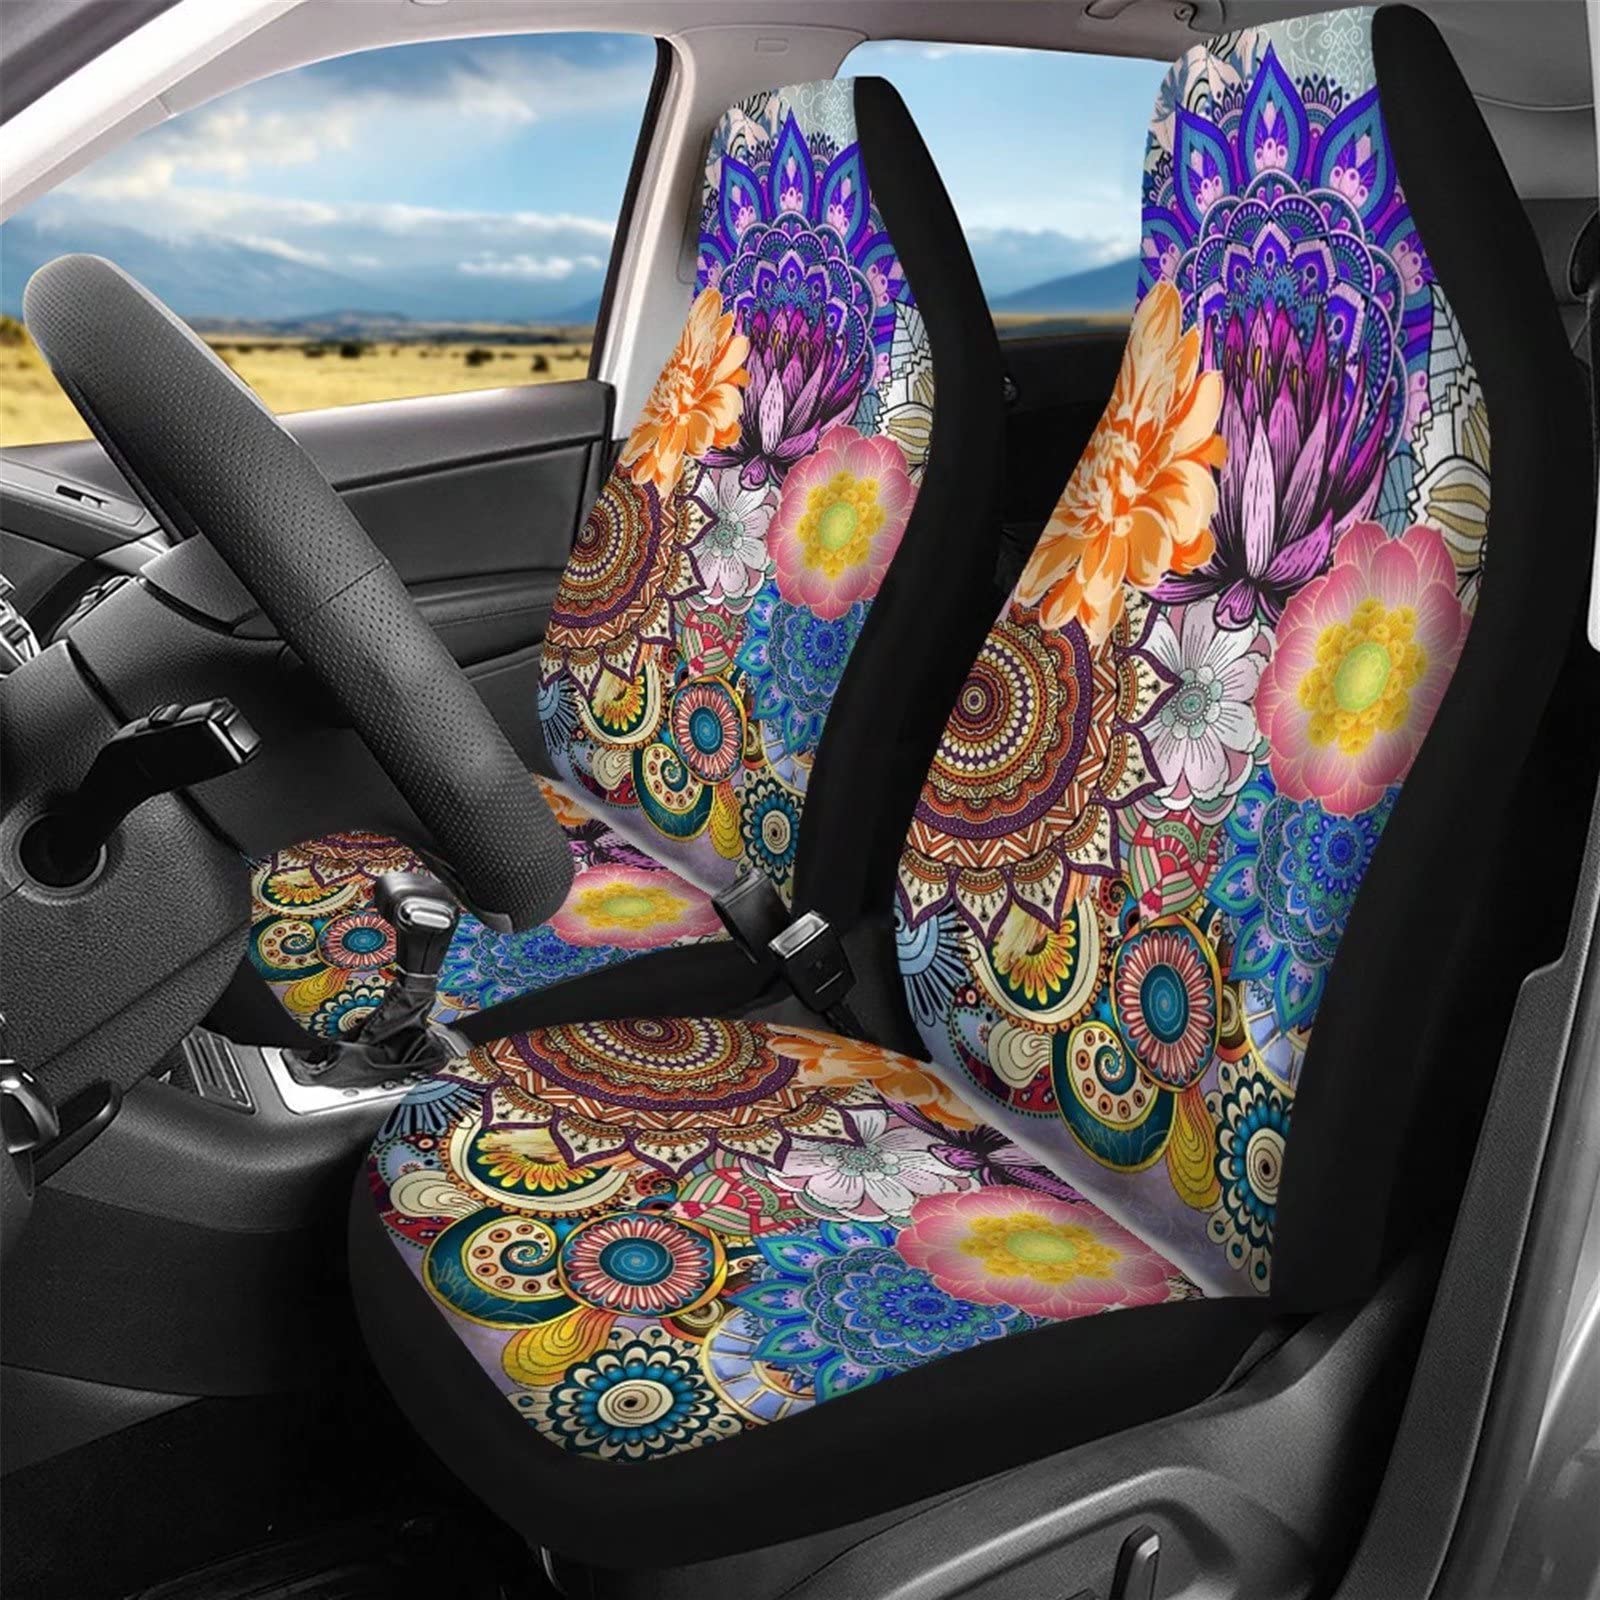 Belidome Bright Boho Flower Car Seat Covers for Women Soft Durable Fit Most Vehicles SUV von Belidome